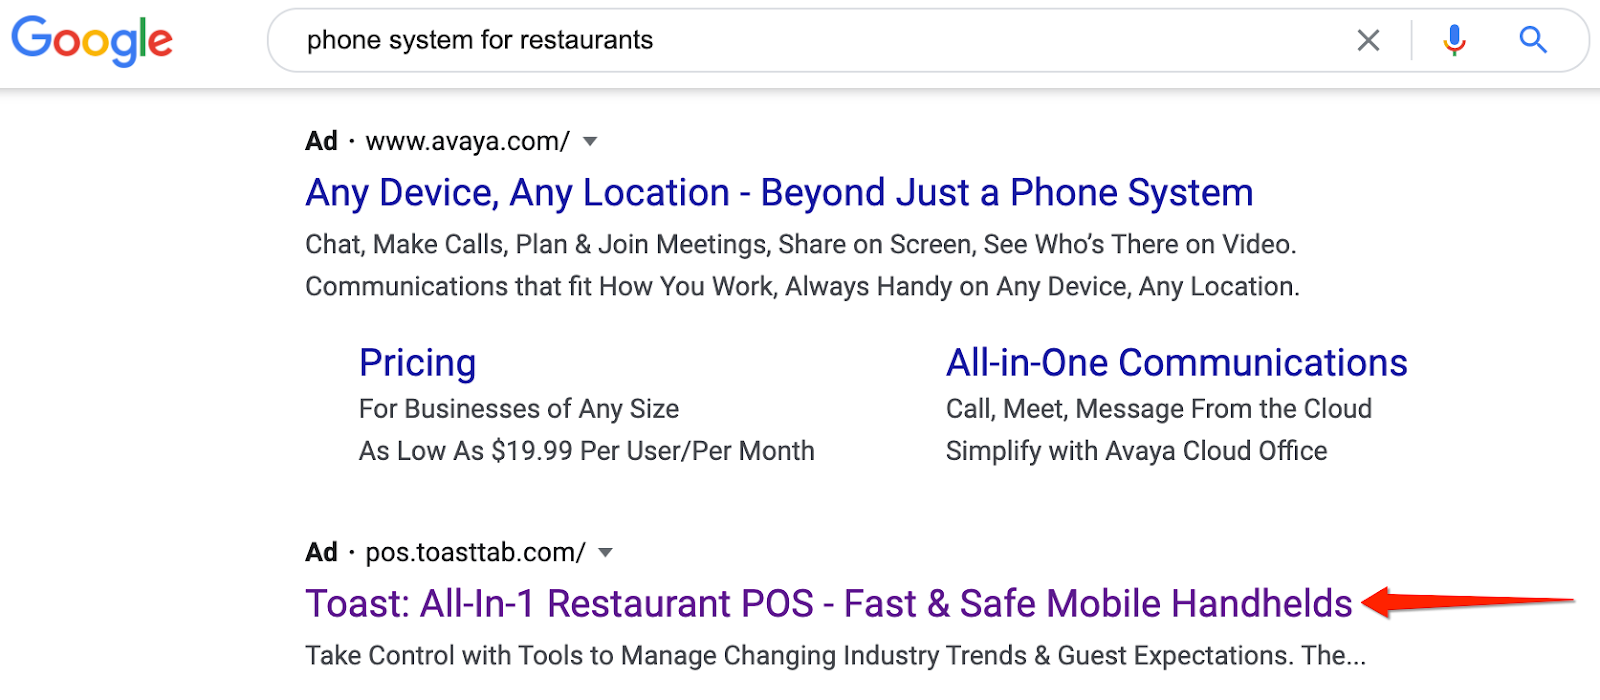 search results for phone systems for restaurants